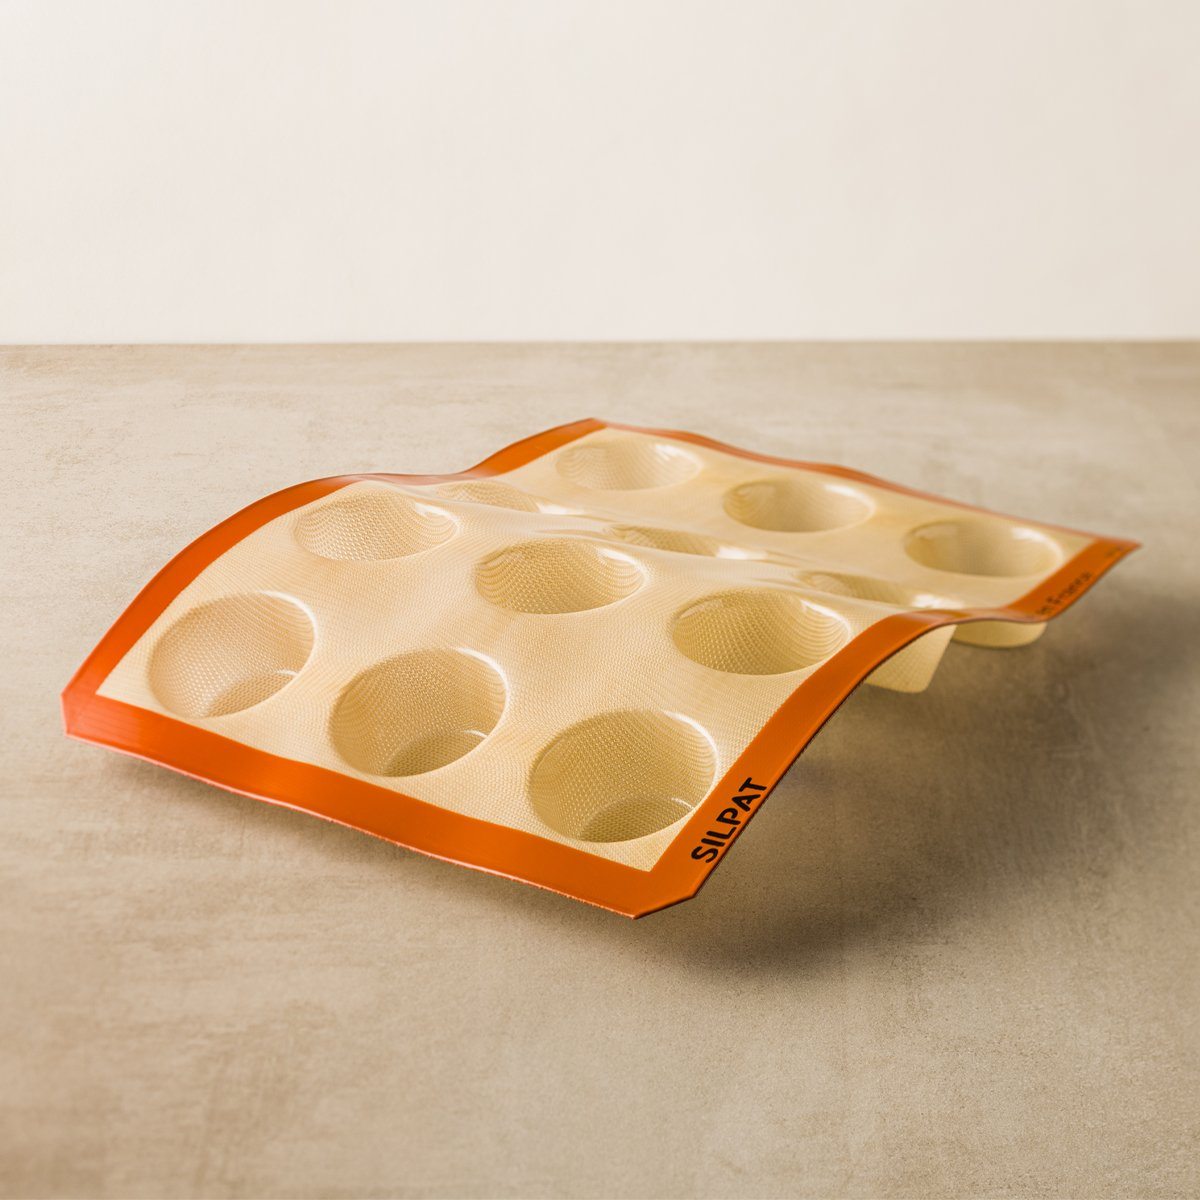  Silpat Perfect Muffin Mold: Home & Kitchen